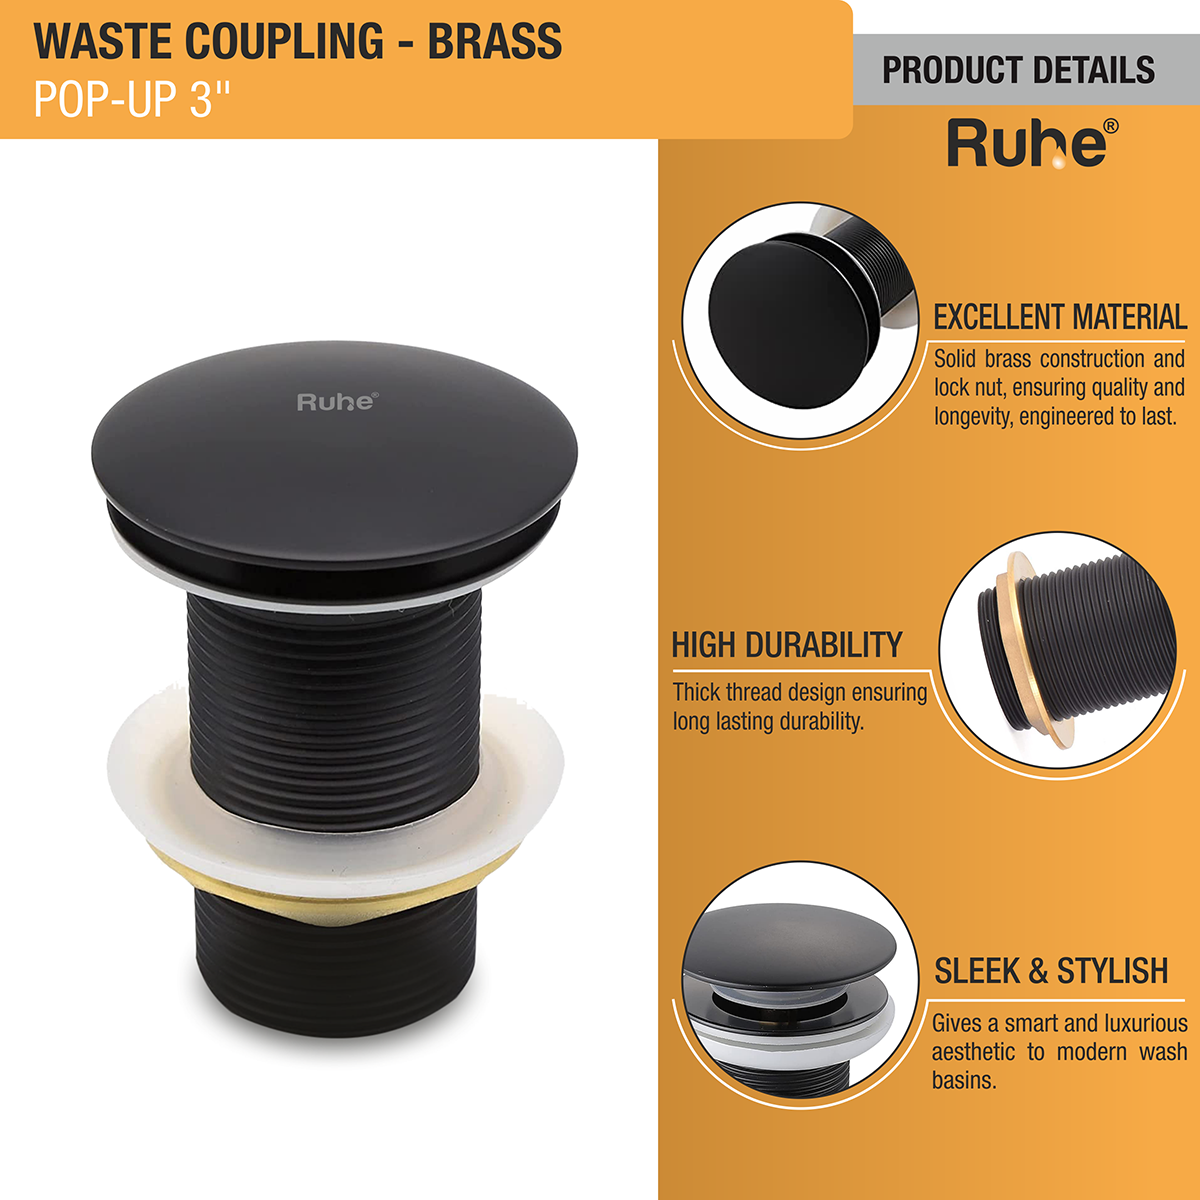 Pop-up Waste Coupling in Matte Black PVD Coating (3 Inches) product details